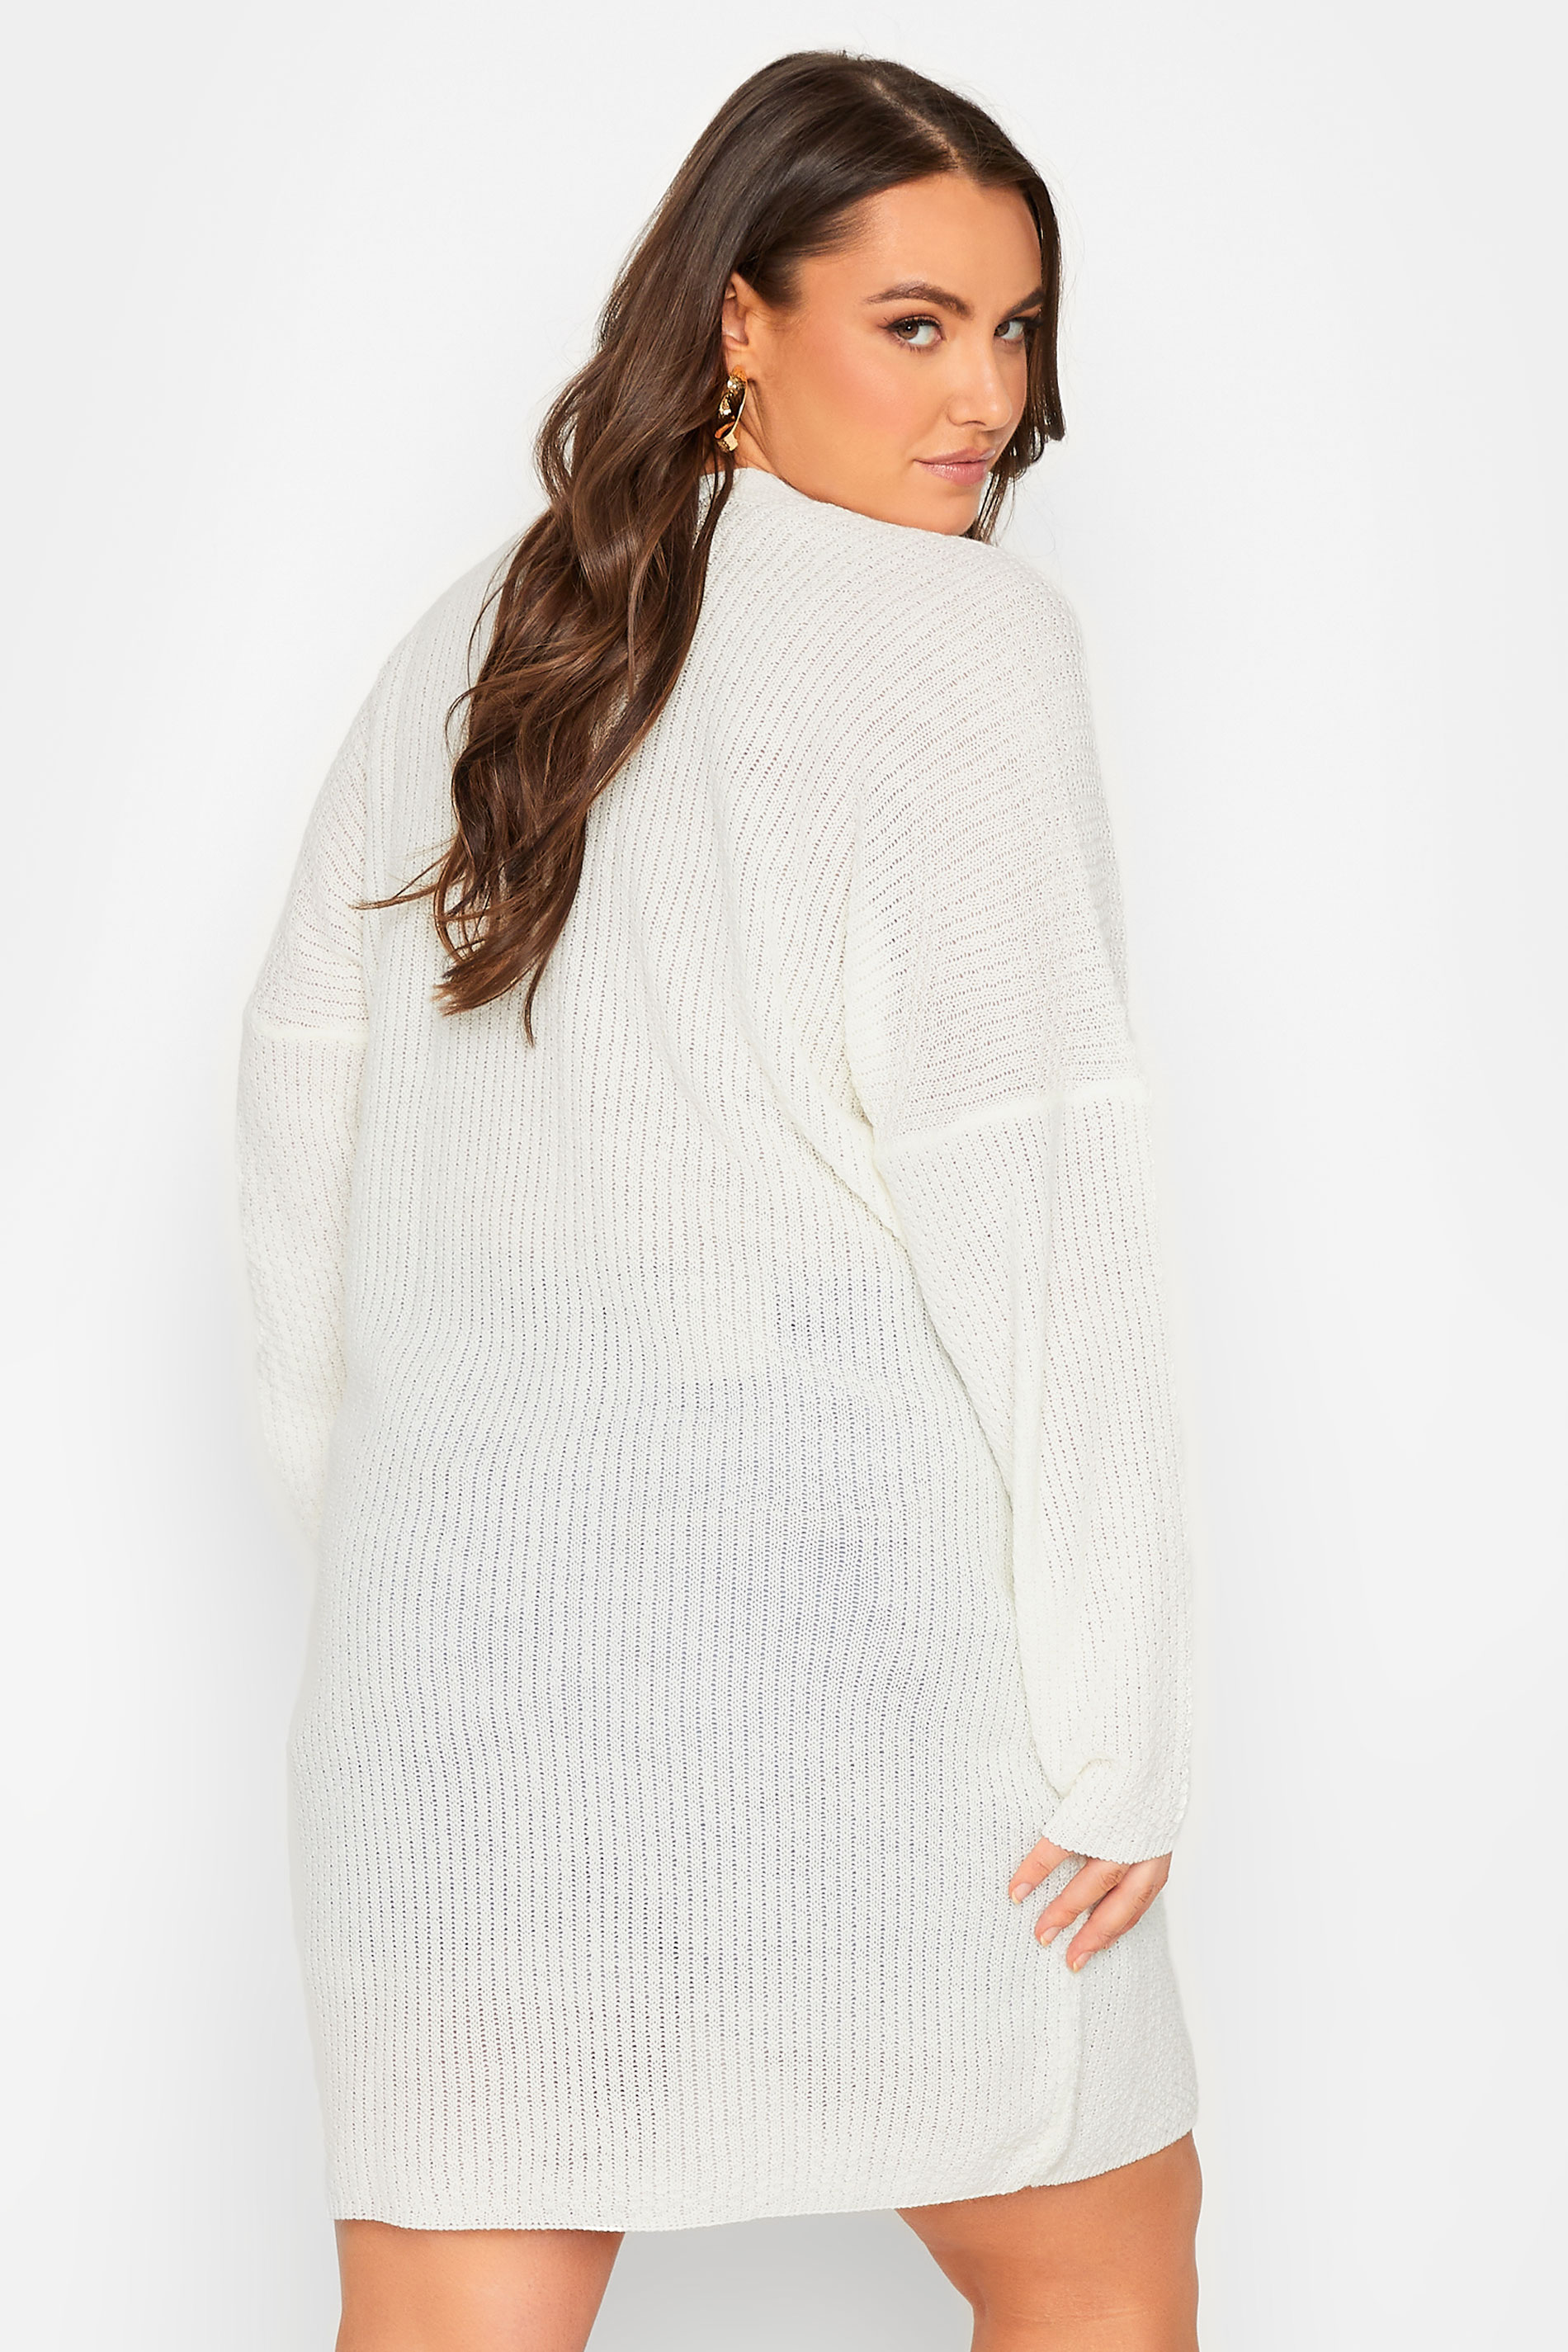 YOURS Curve Plus Size White Pointelle Long Sleeve Cardigan | Yours Clothing  3